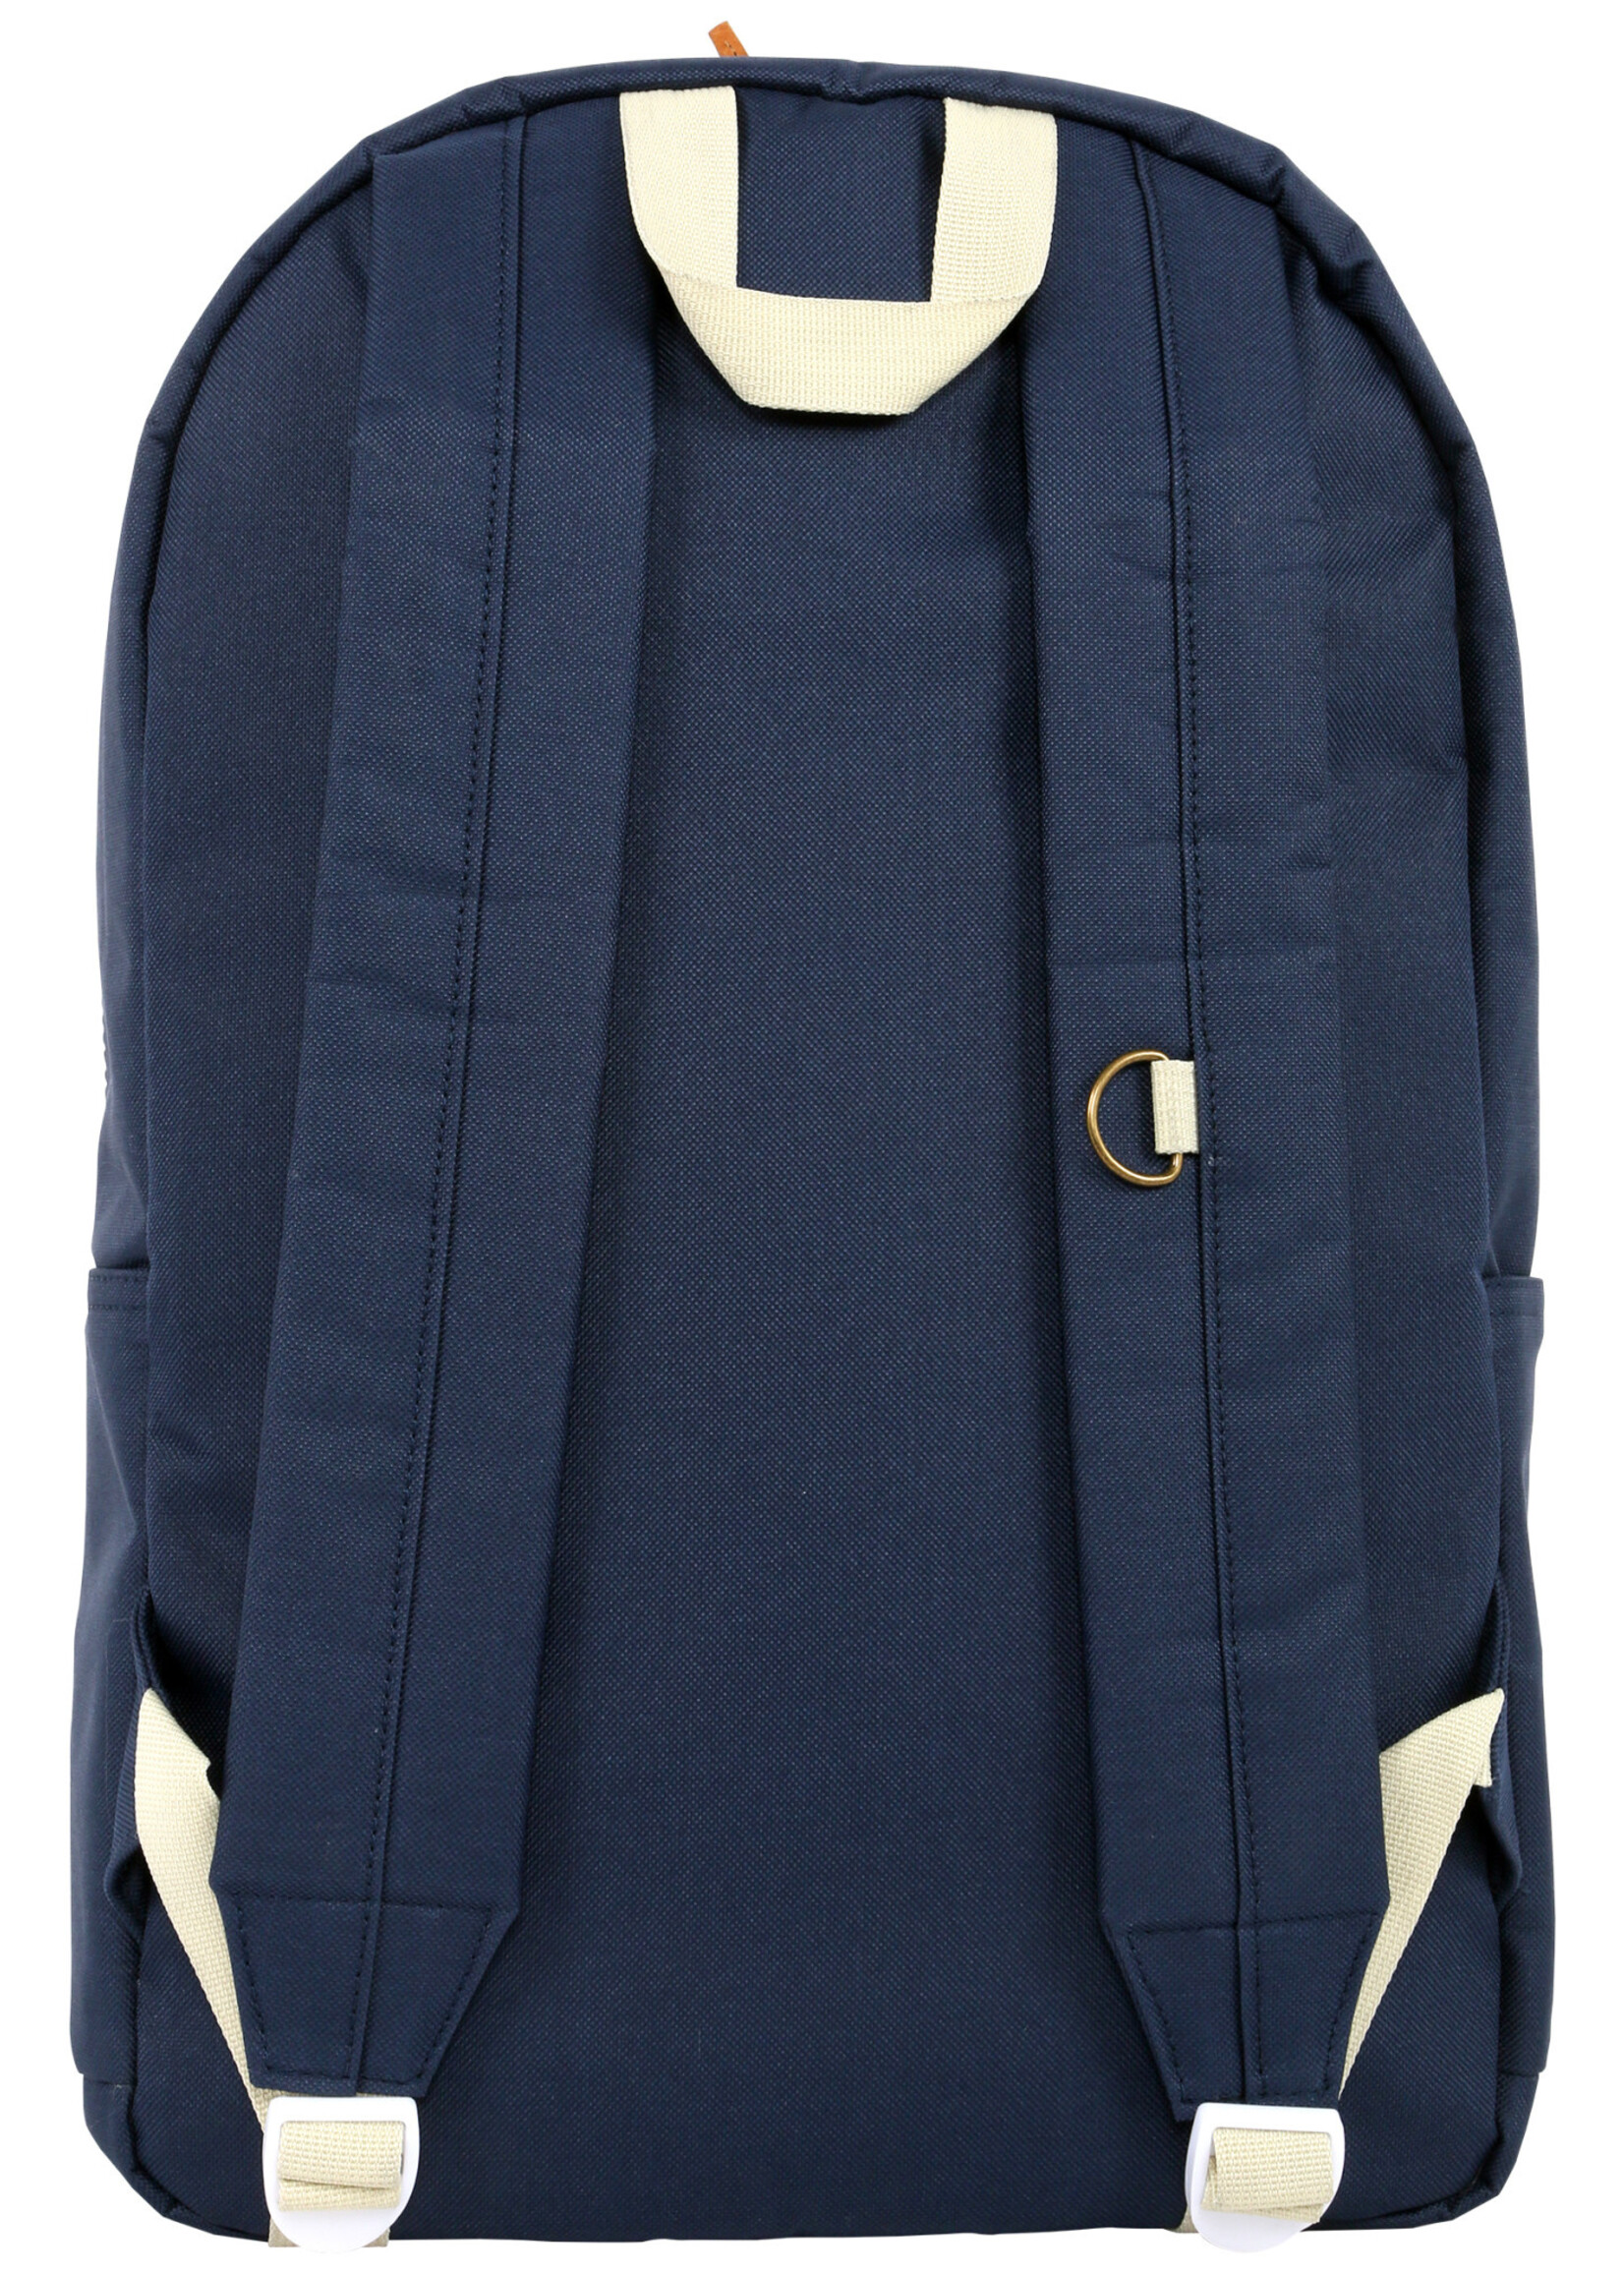 TRAP TRAP Backpack - Navy